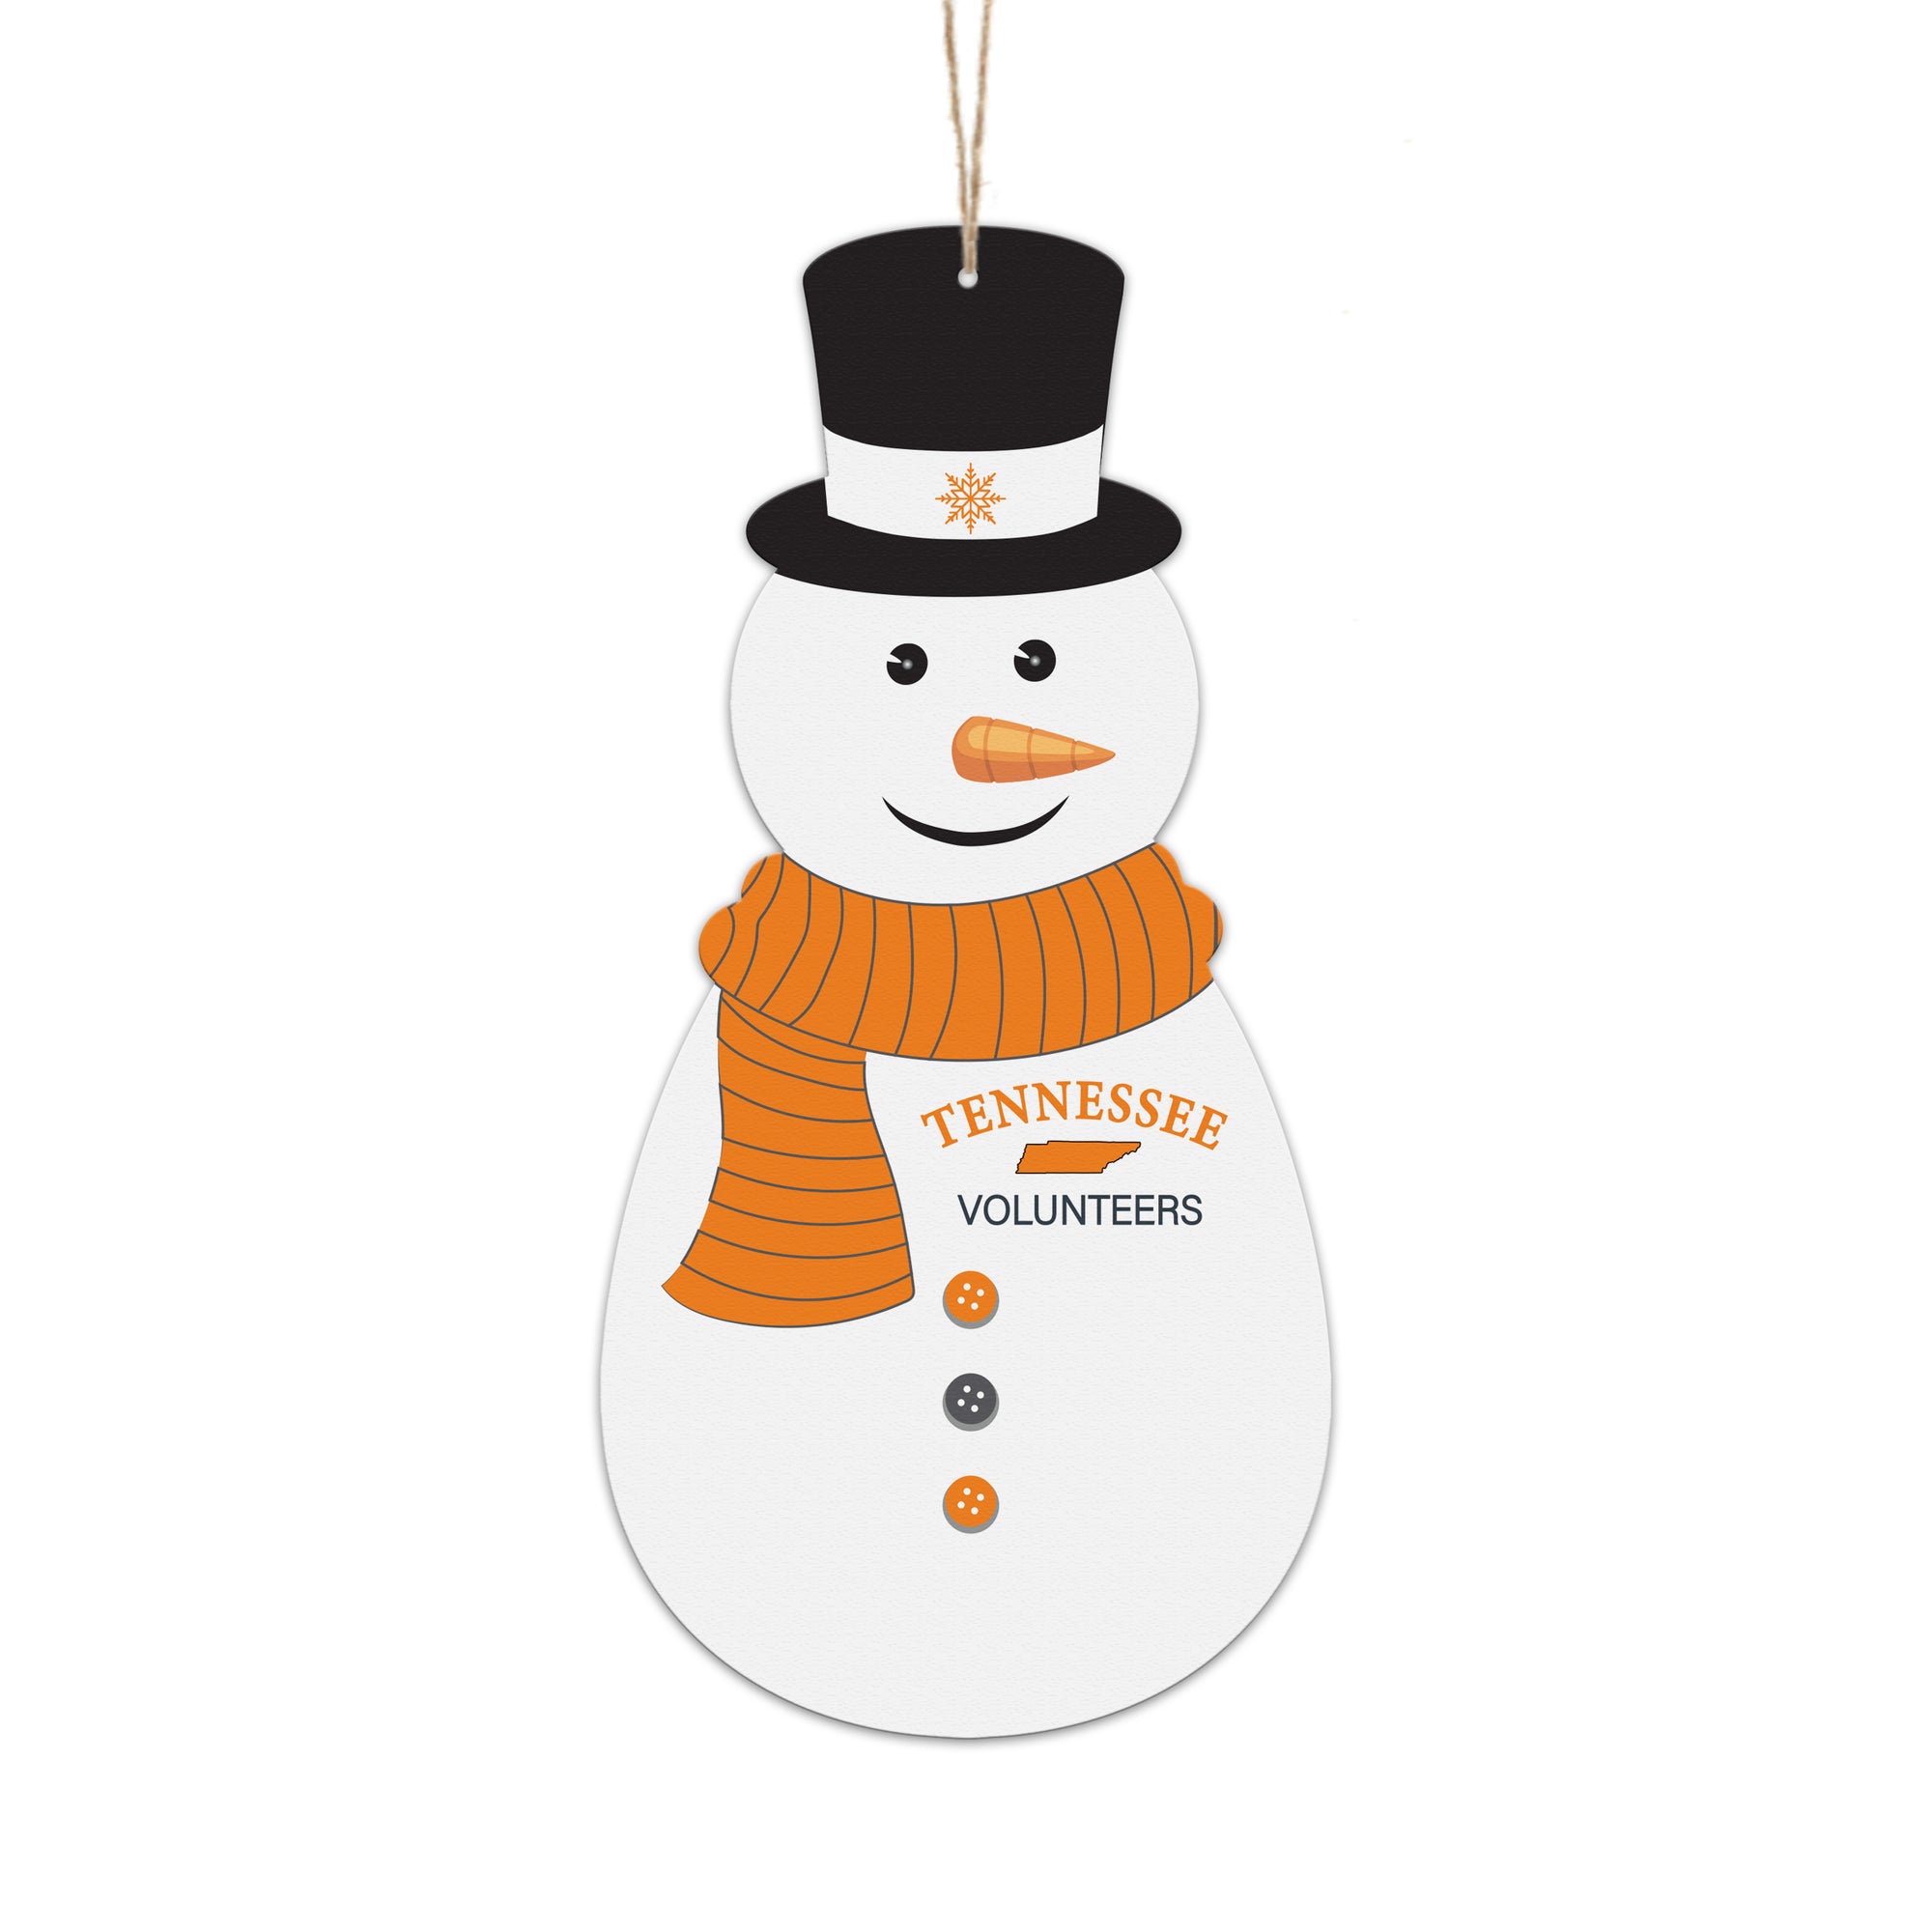 Lifesong Milestones Personalized Christmas Tree Decoration Tennessee Volunteers Snowman Ornament - Holiday Decor For Home Gift Ideas 8x16